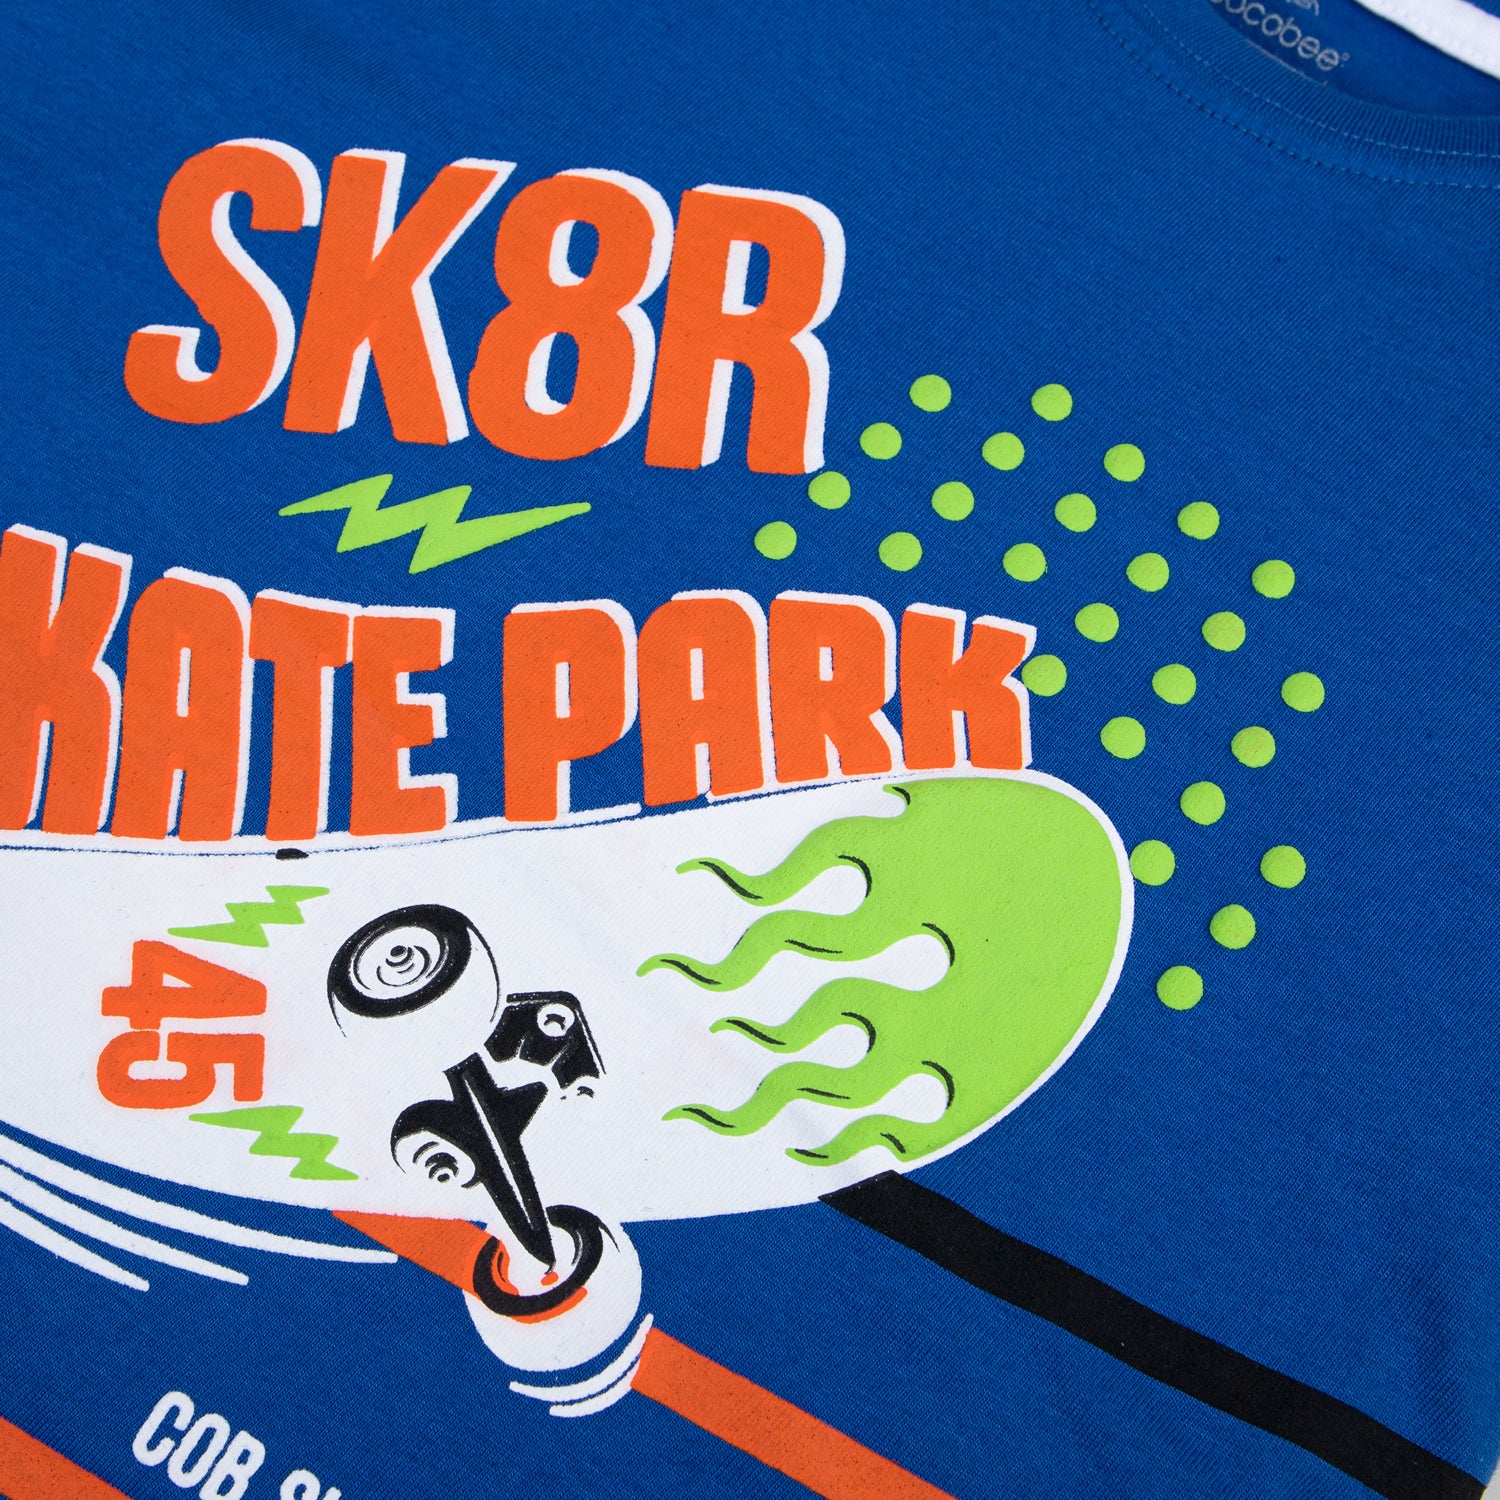 Cool Skater Graphic Tee